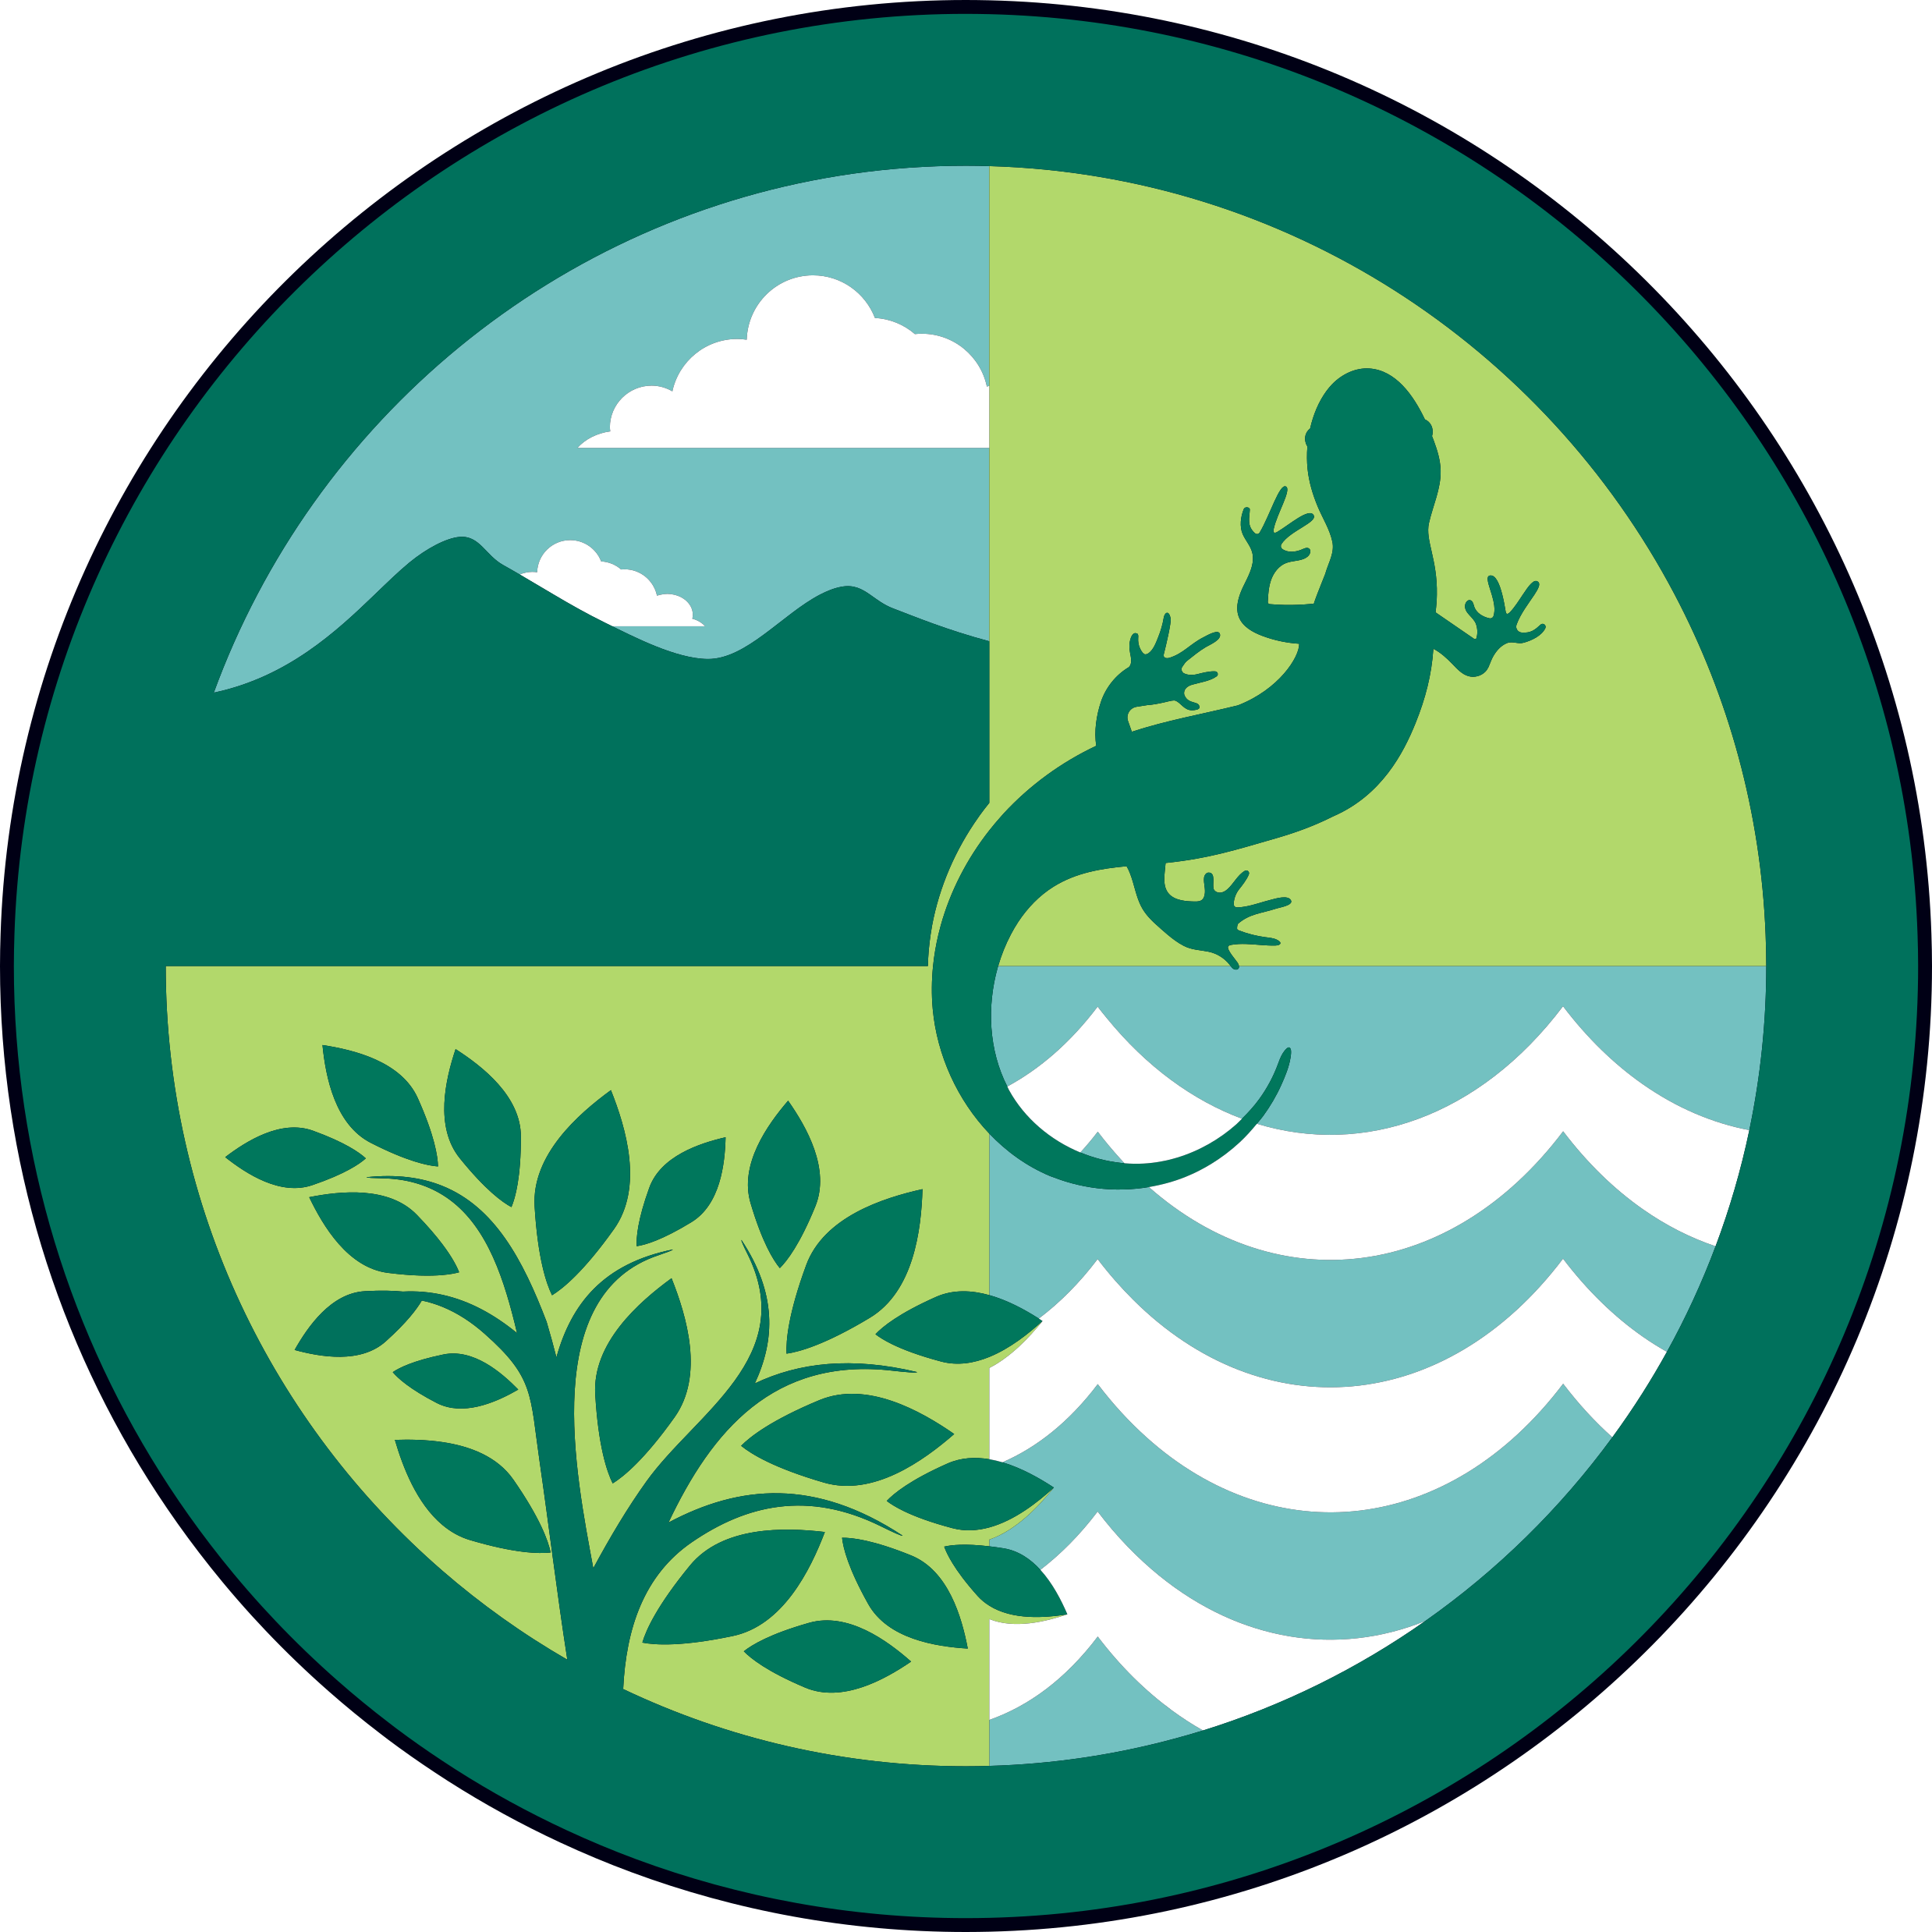 Main page image for Adirondack Park trail registry information